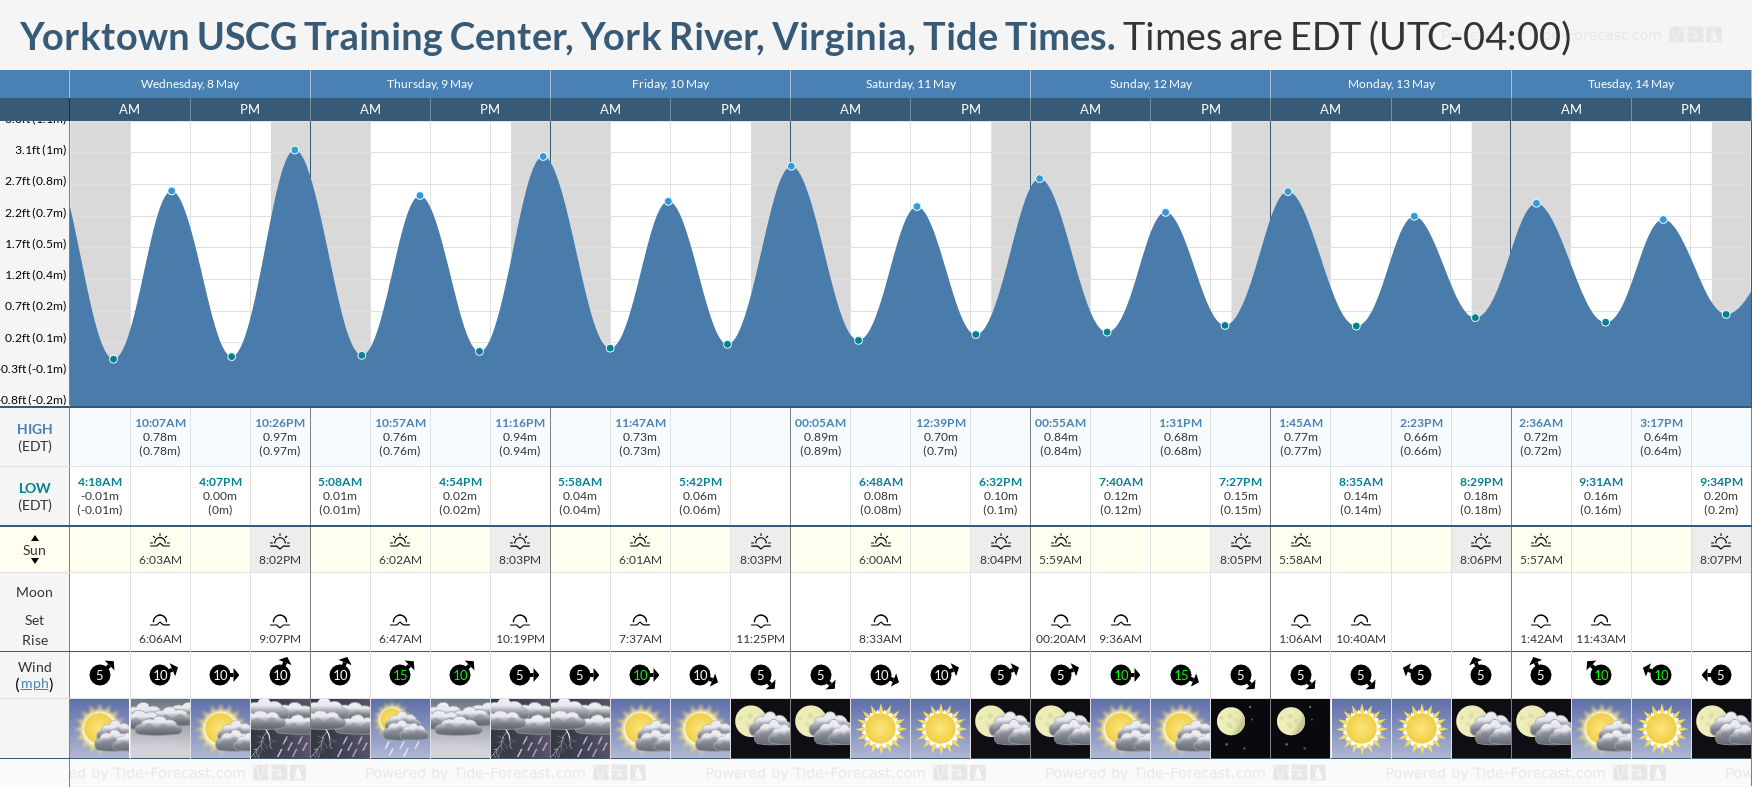 Yorktown USCG Training Center, York River, Virginia Tide Chart including high and low tide times for the next 7 days